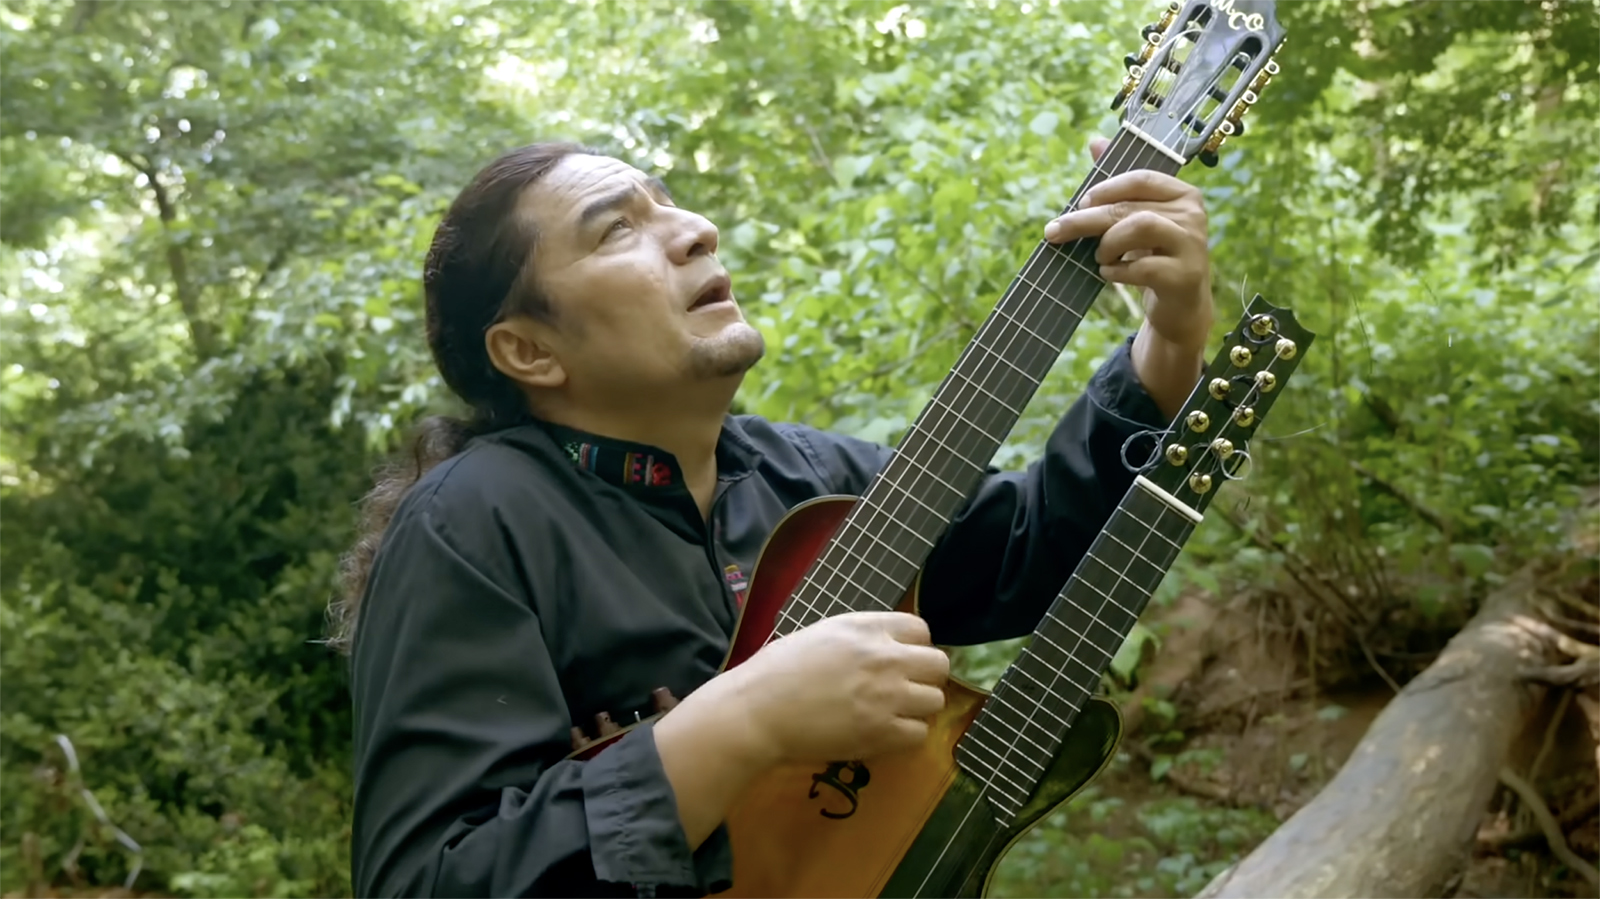 Julio Cuellar Gonzales in the "Padre Nuestro," or "Our Father," video that has 23 million views. (Video screen grab)